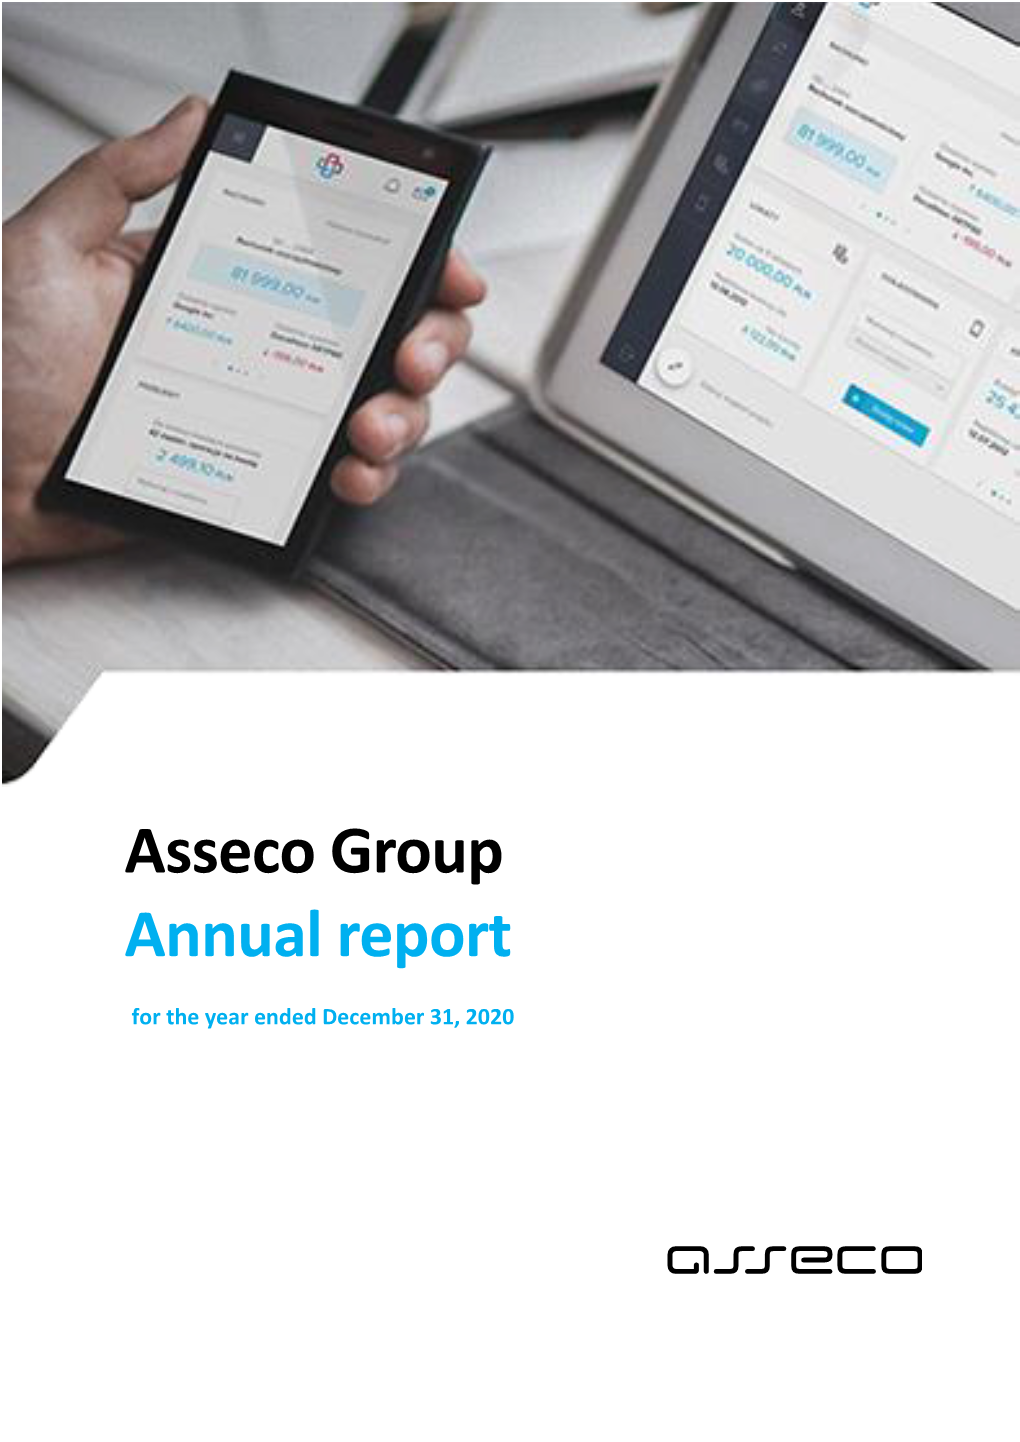 Asseco Group Annual Report